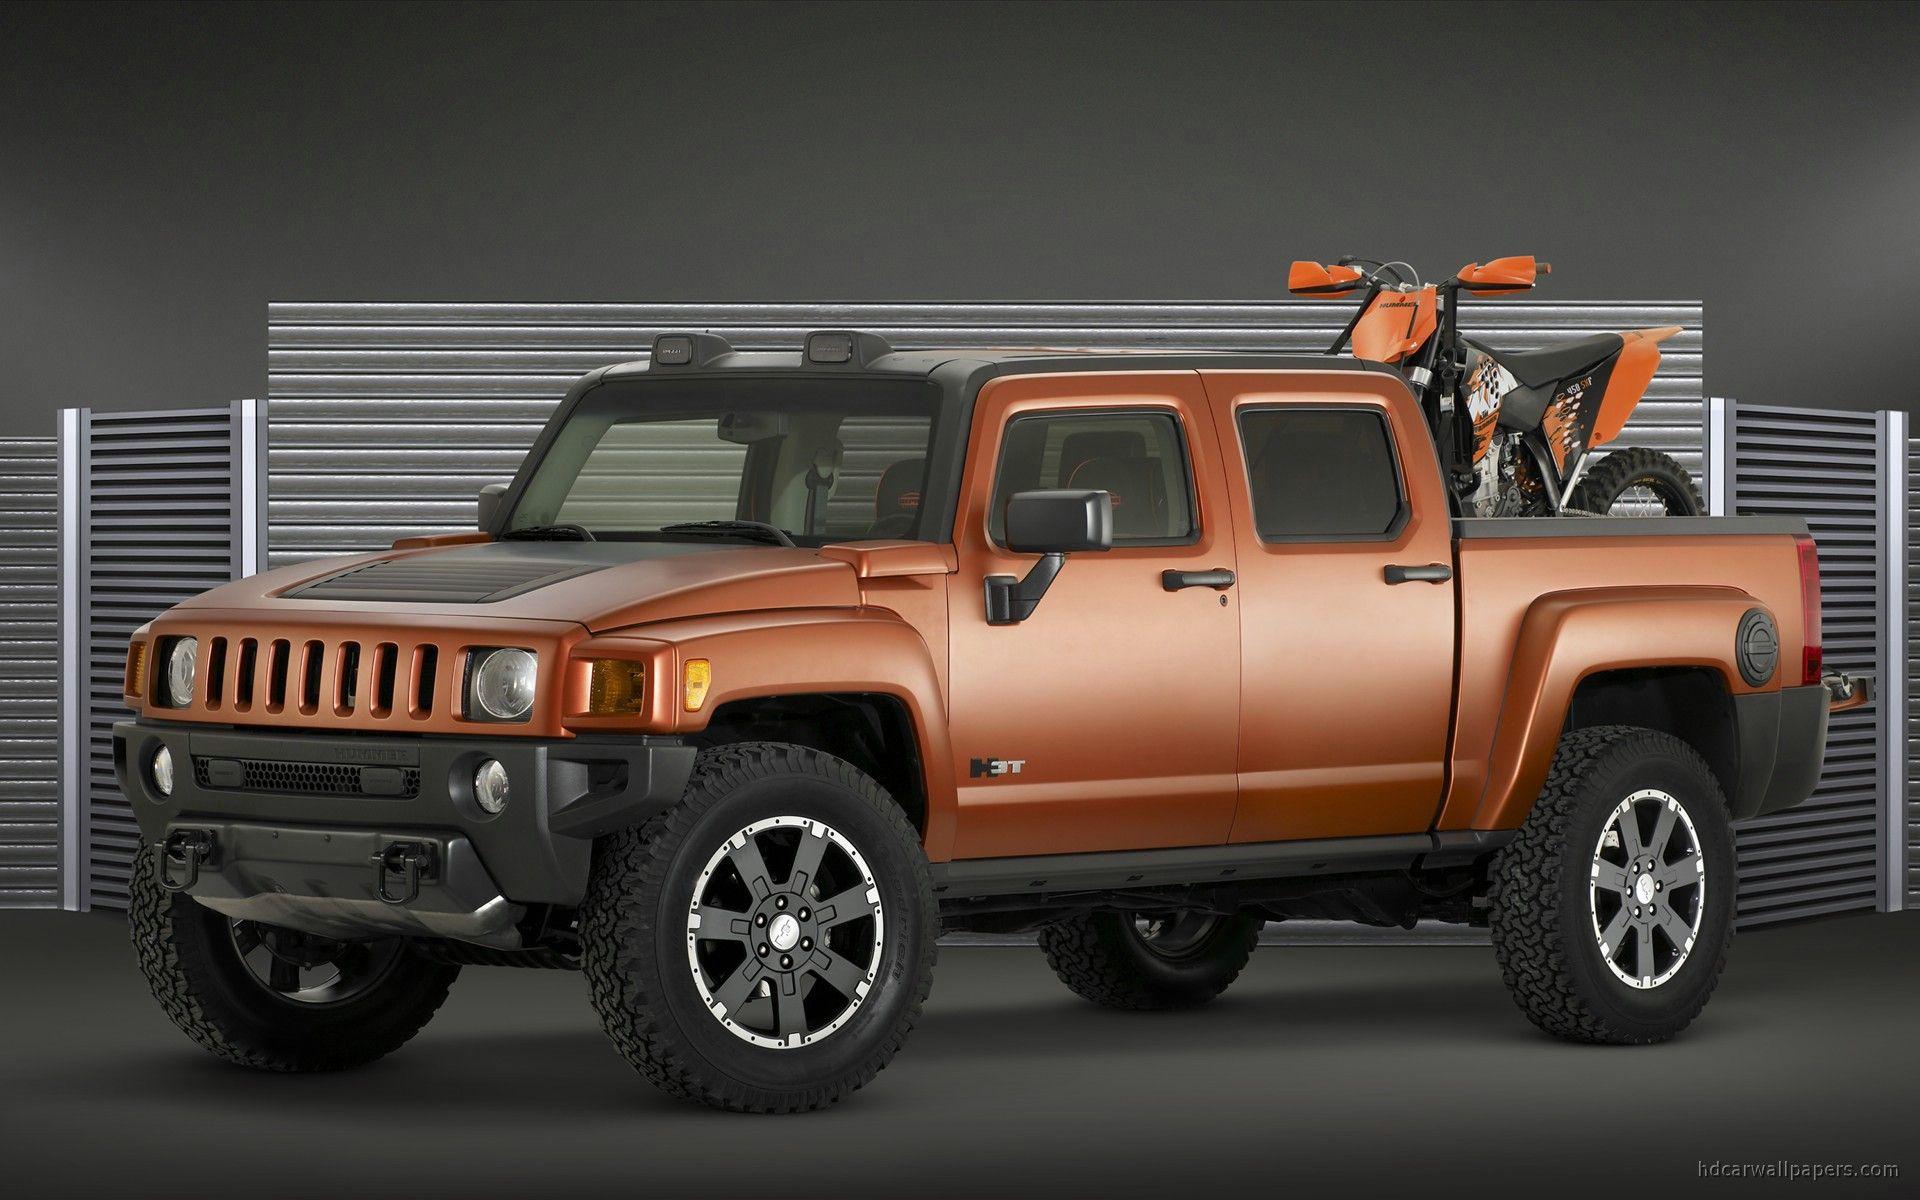 Hummer Car Hd Wallpapers For Mobile